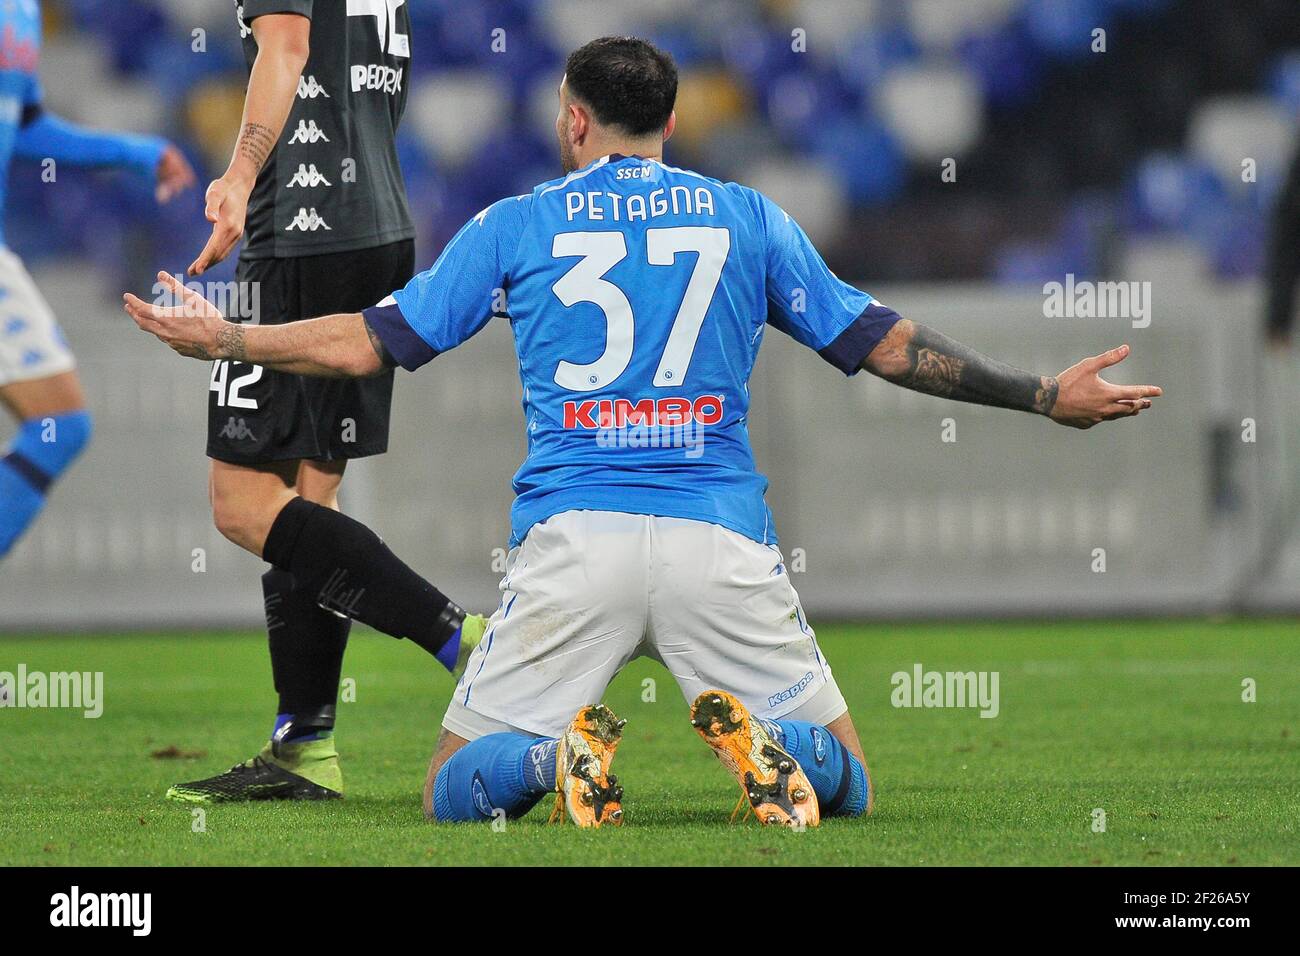 Andrea Petagna player of Napoli, during the Italian Cup match between  Napoli vs Empoli final result 3-2, match played at the Diego Armando  Maradona st Stock Photo - Alamy